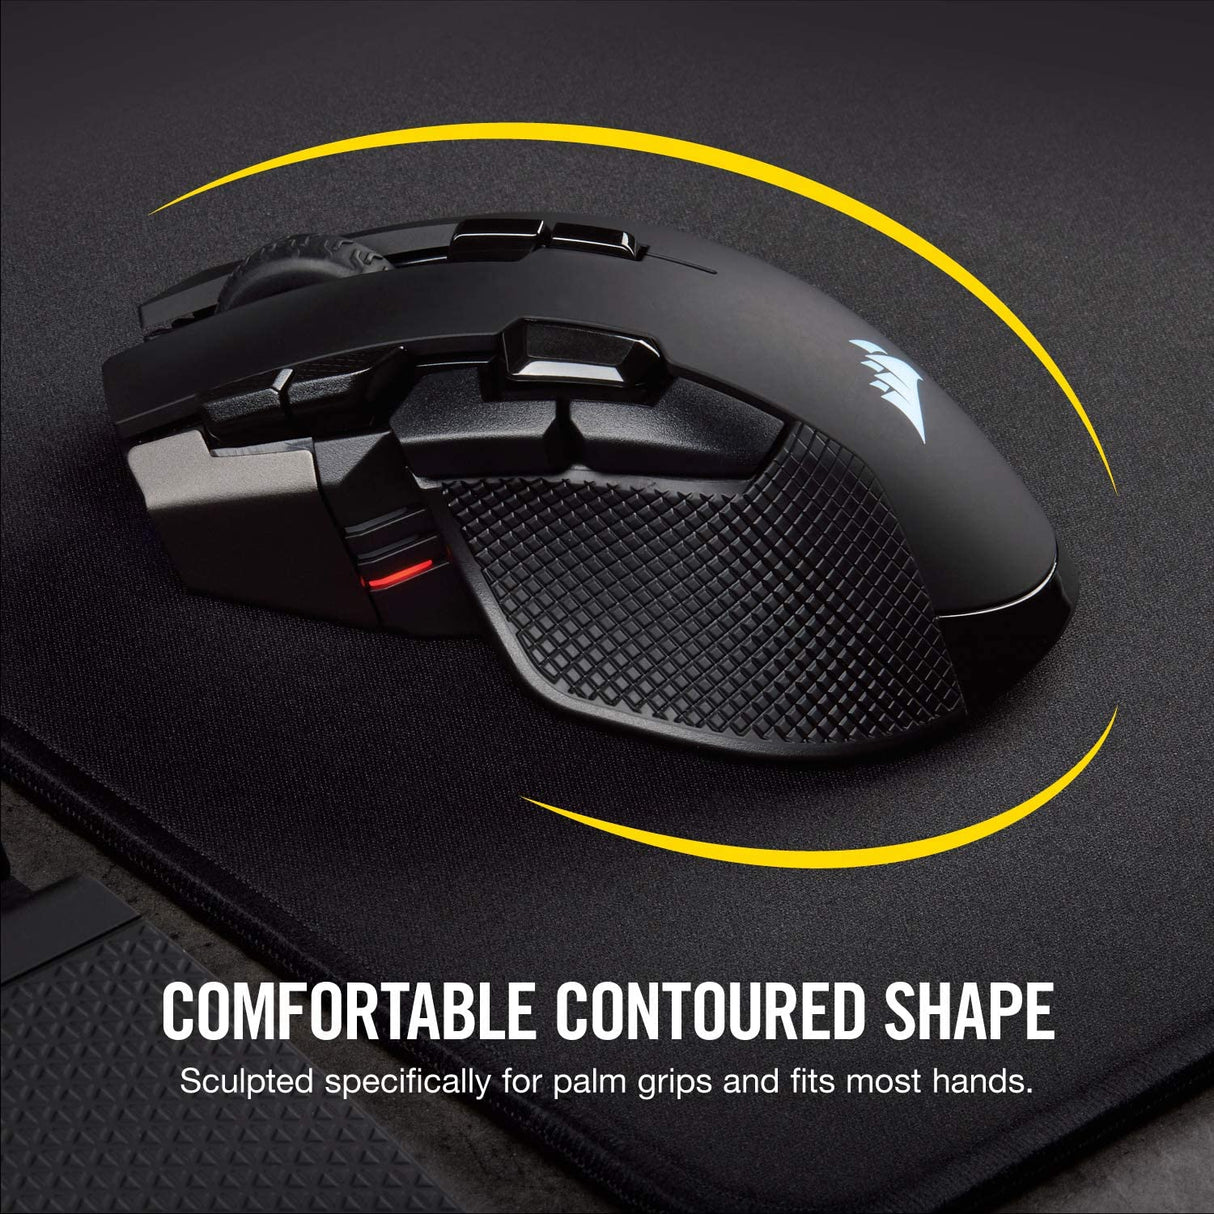 Corsair Ironclaw Wireless RGB - FPS and MOBA Gaming Mouse - 18,000 DPI Optical Sensor - Sub-1 ms SLIPSTREAM Wireless Wireless Mouse